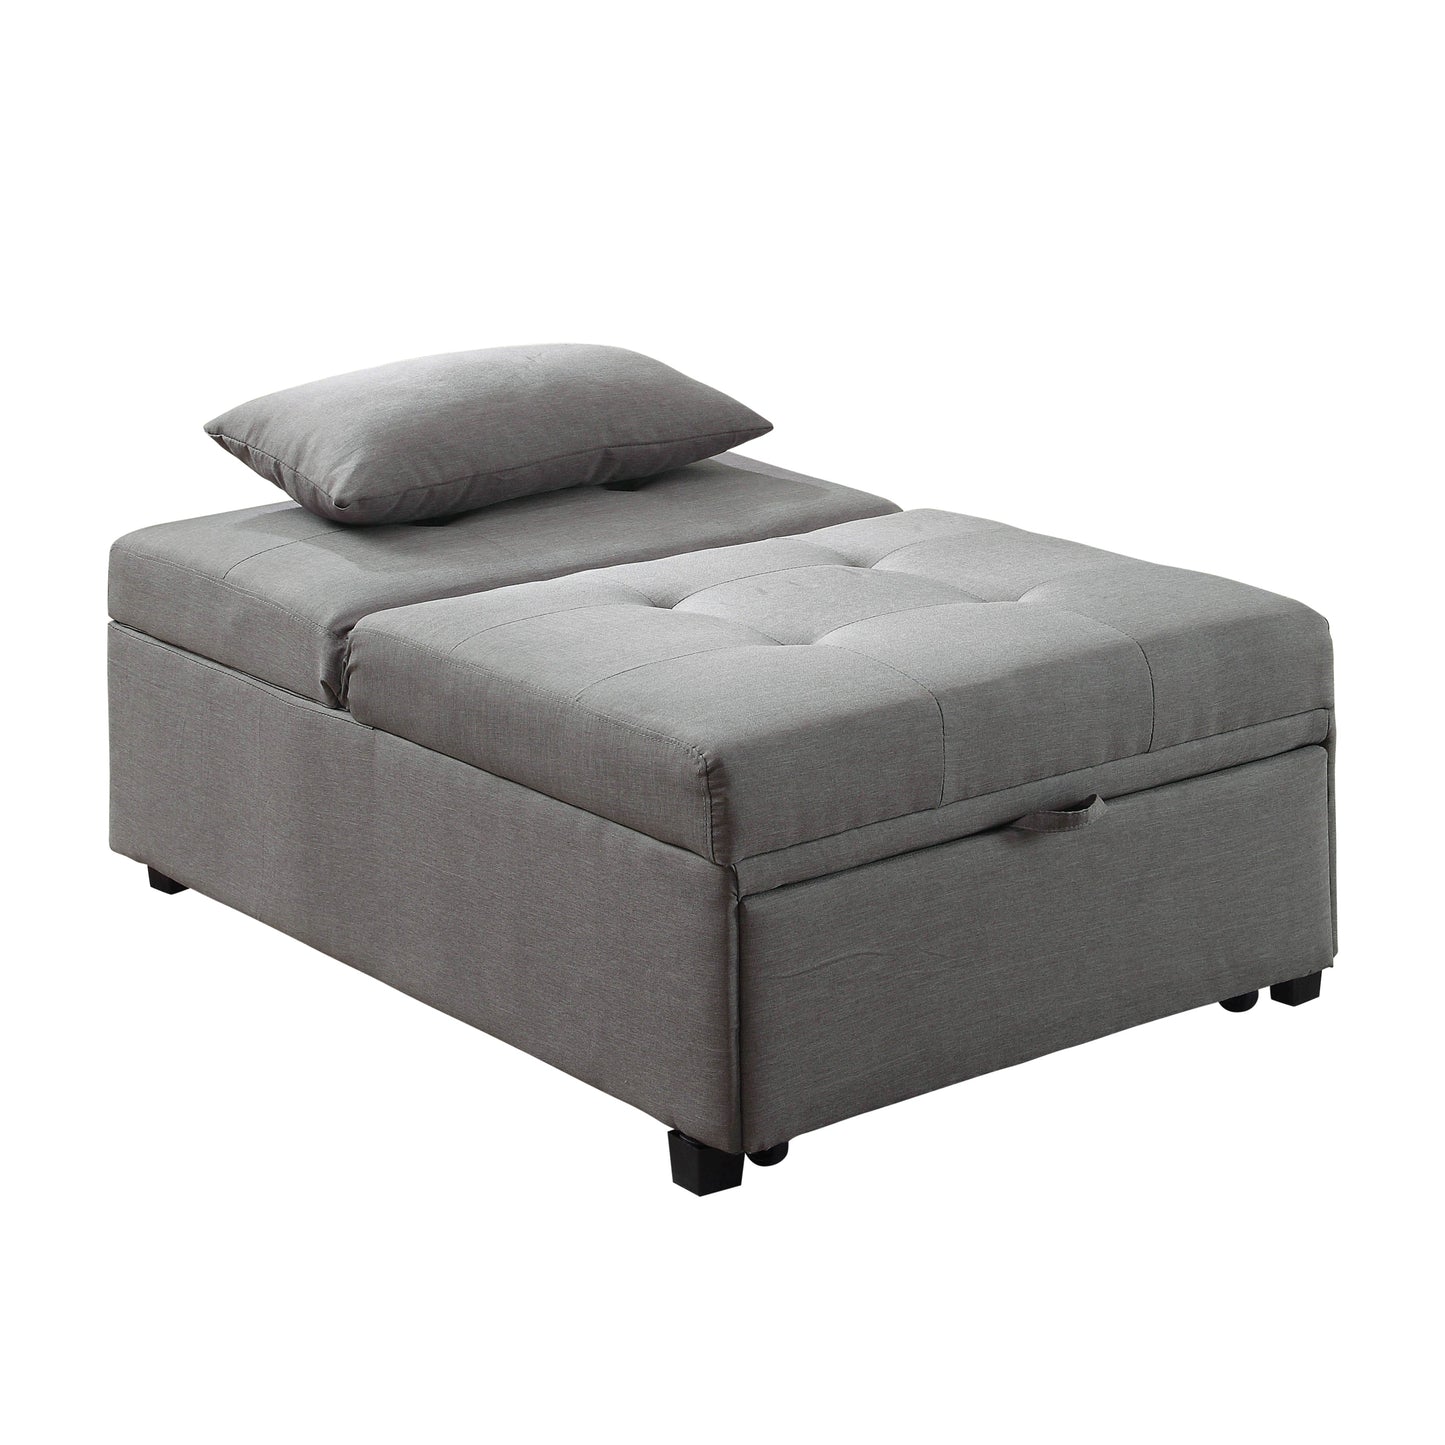 Oon Contemporary Tufted Futon in Gray